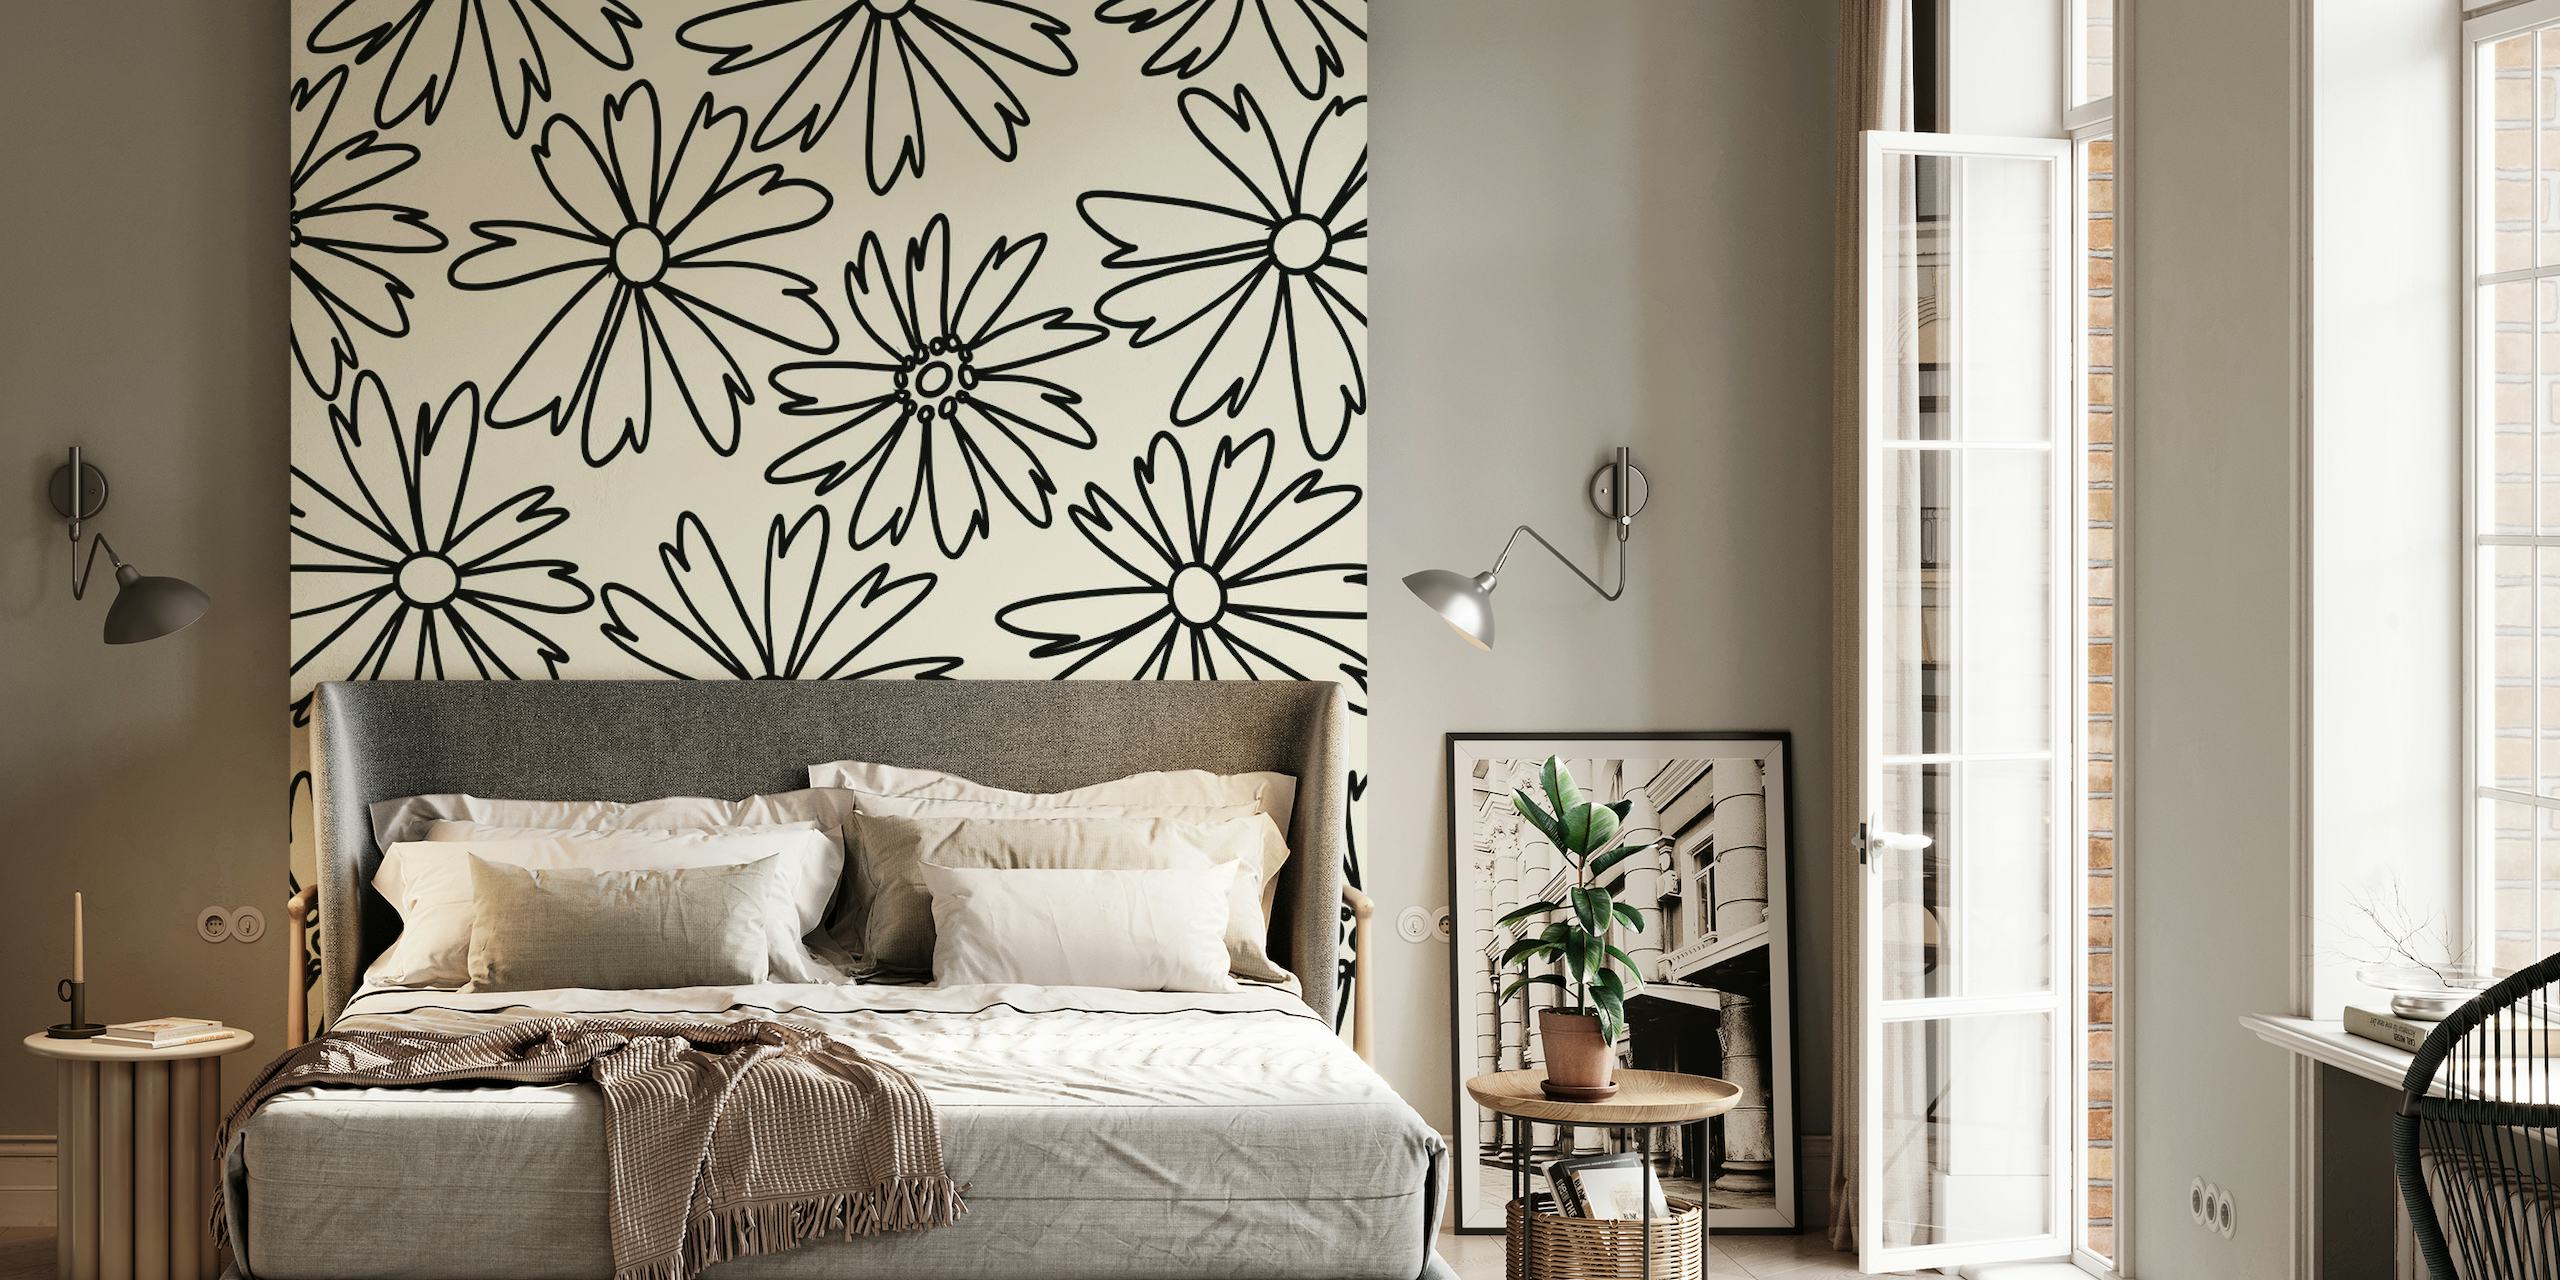 Hand-drawn cosmea flowers pattern wall mural on a neutral background